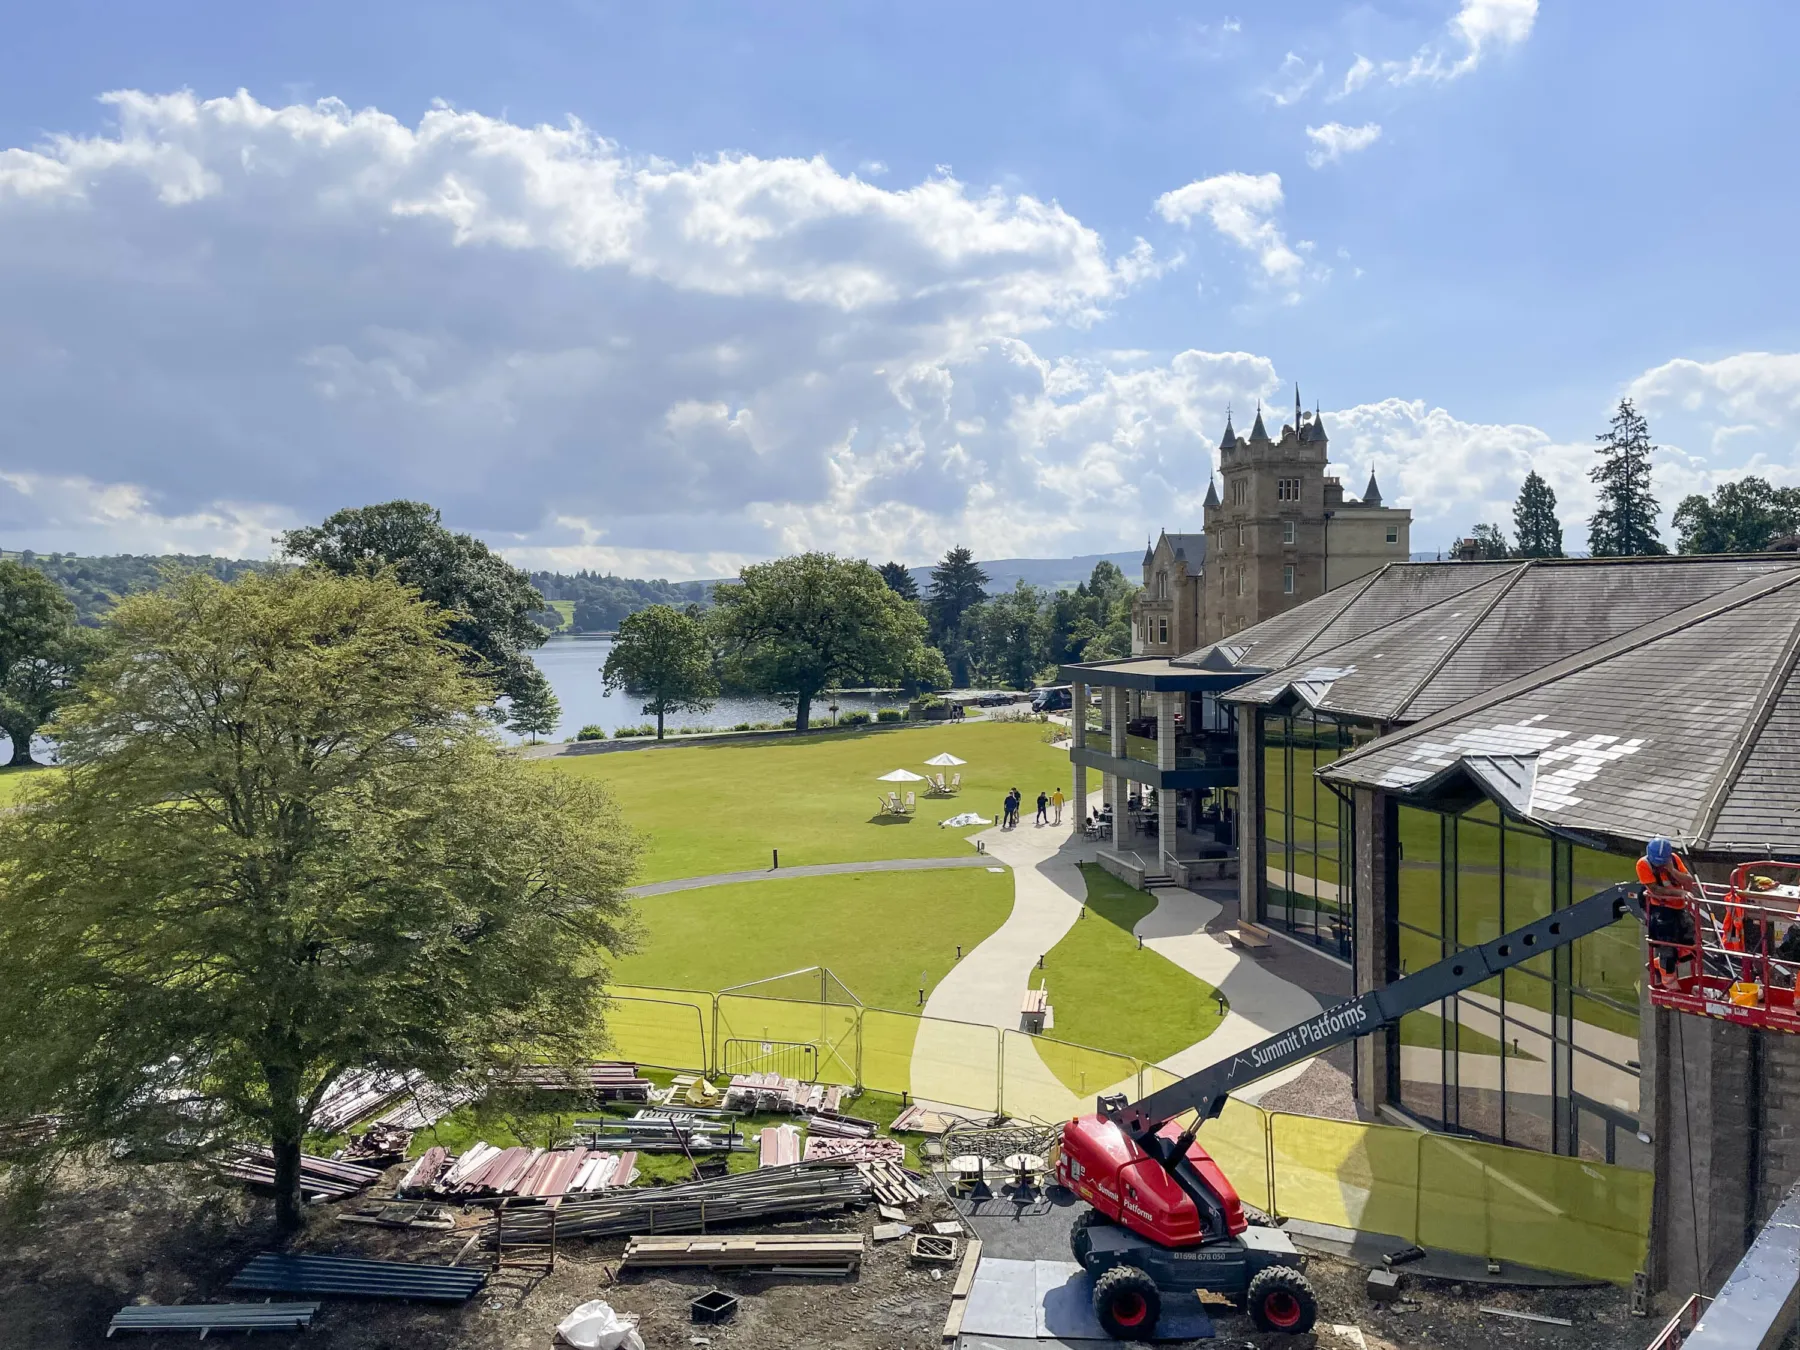 Works underway on a new building at Cameron House Hotel, Loch Lomond. In the background, the historic part of the hotel with newer extensions in front. In the foreground a cherry pickers works on the new building under construction